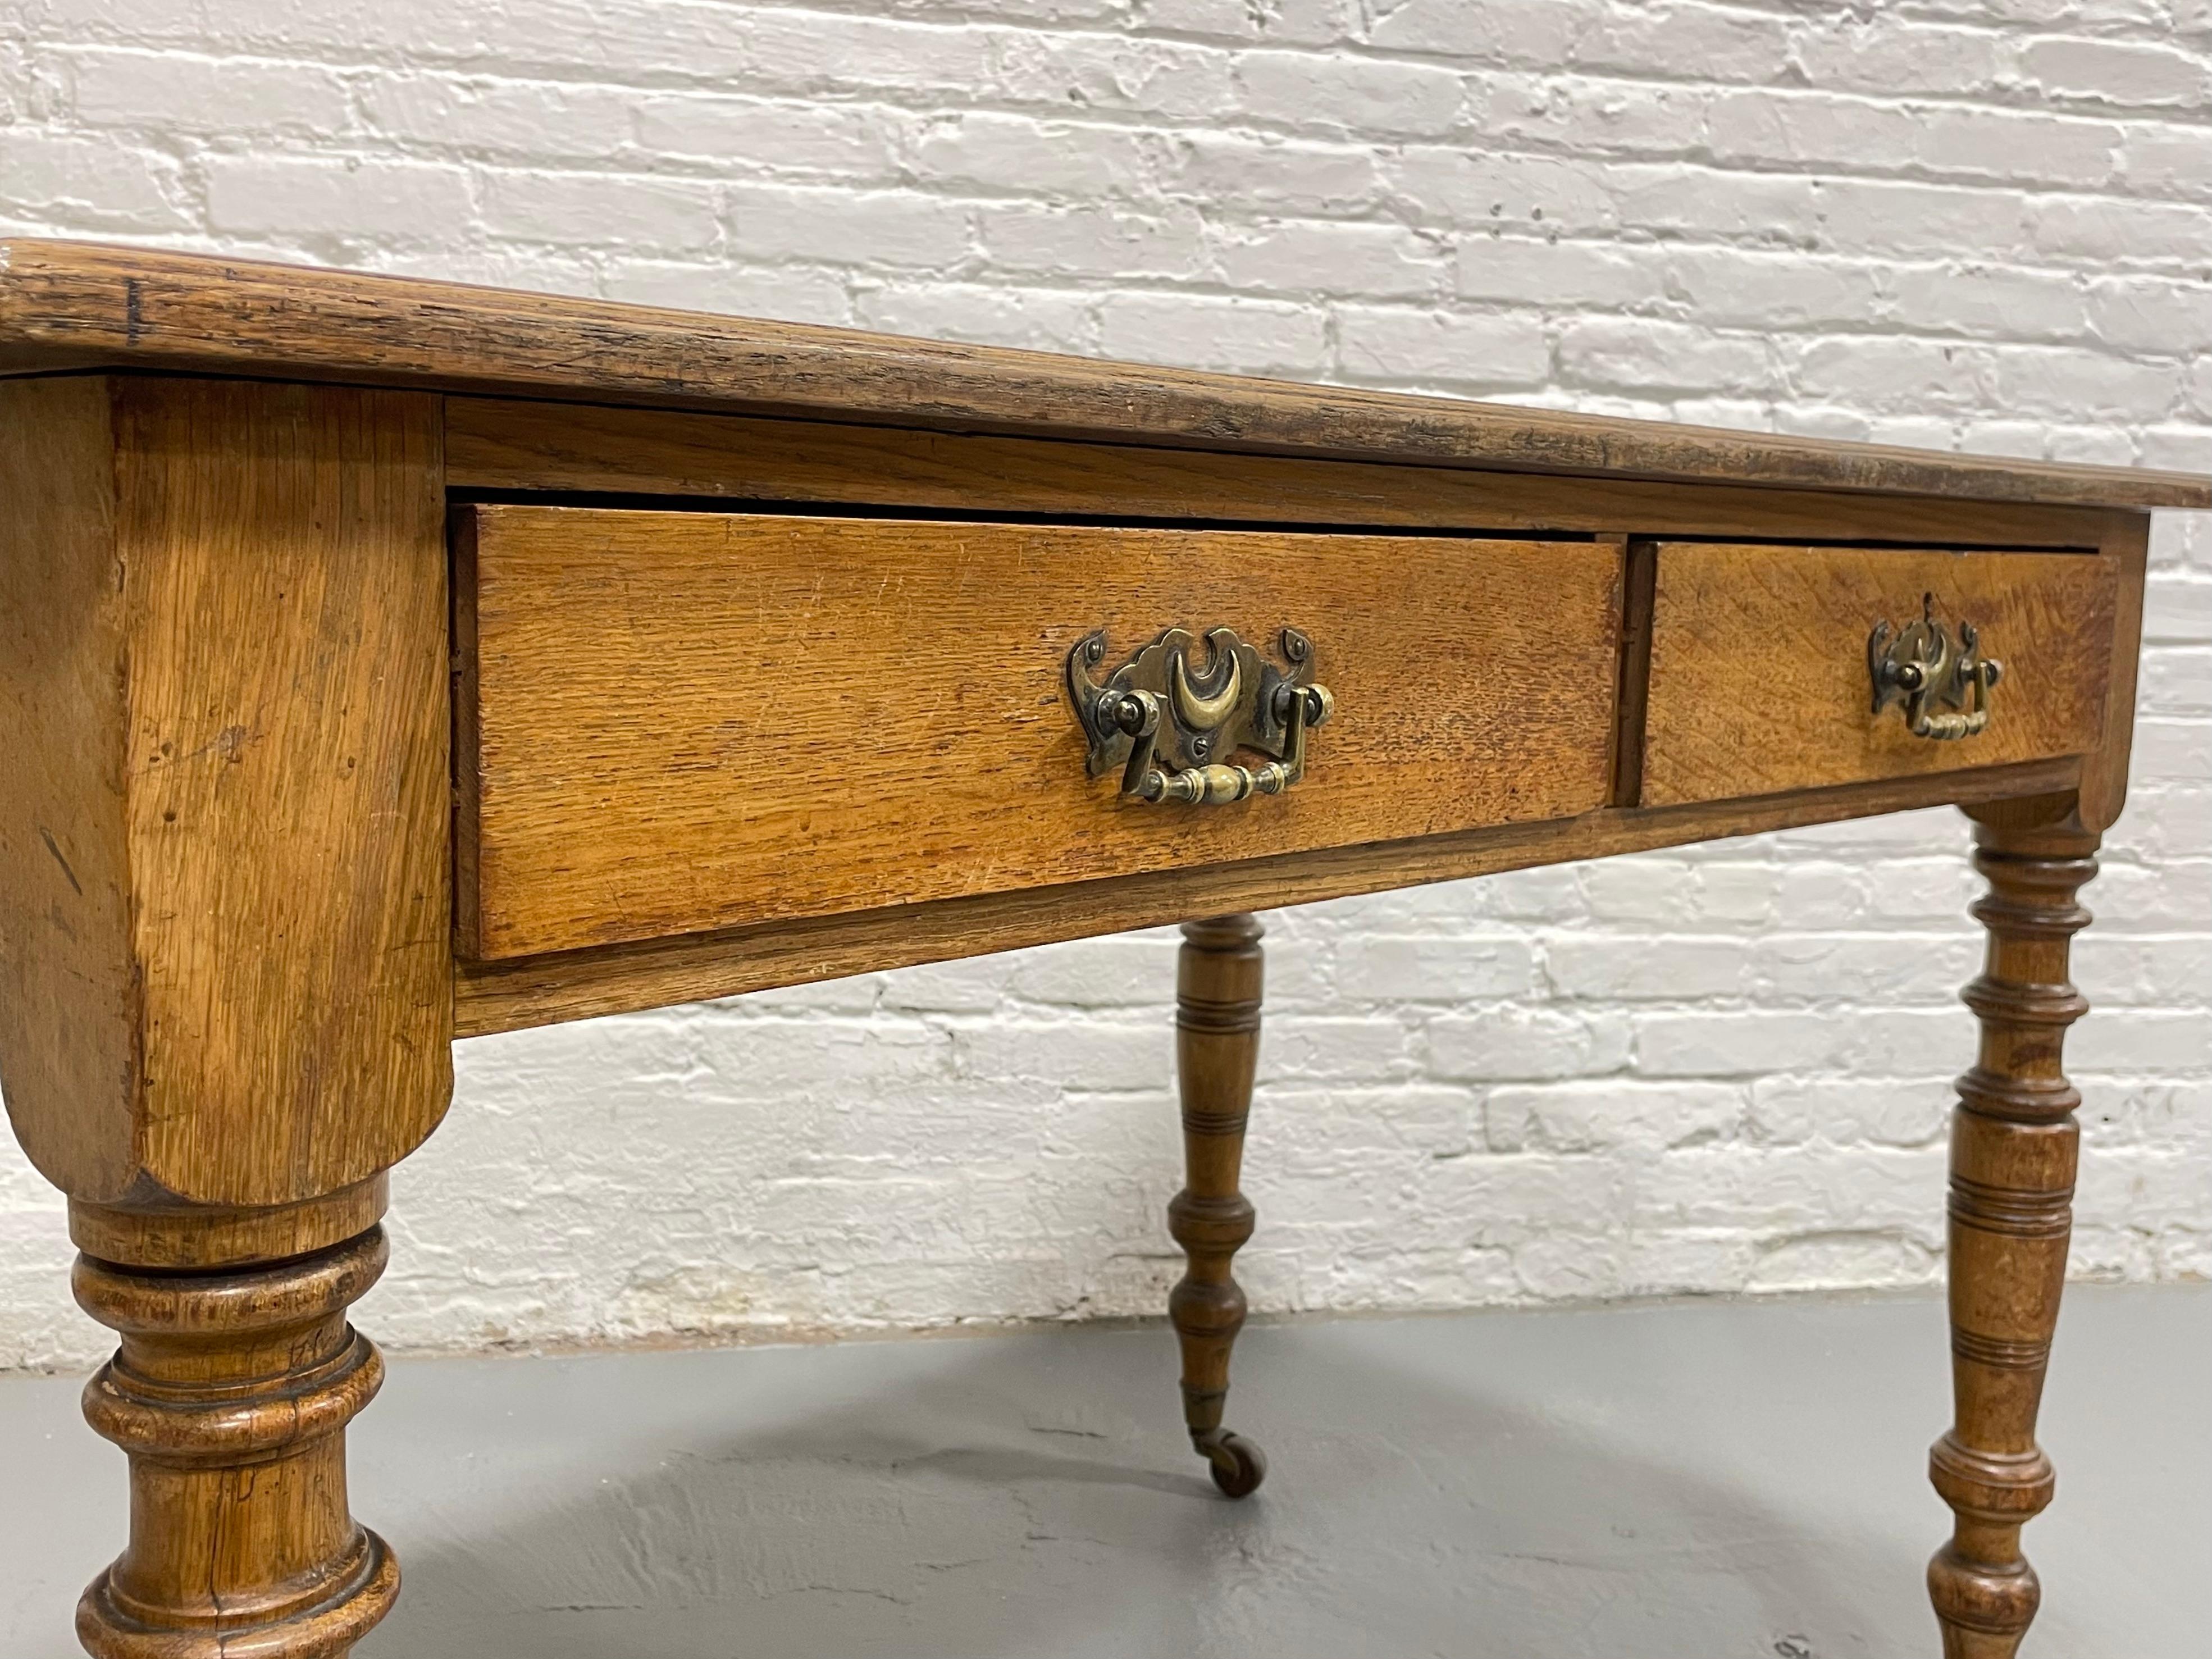 Leather Antique Mahogany Writing Table / Desk Turned Legs Wheels, c. 1890